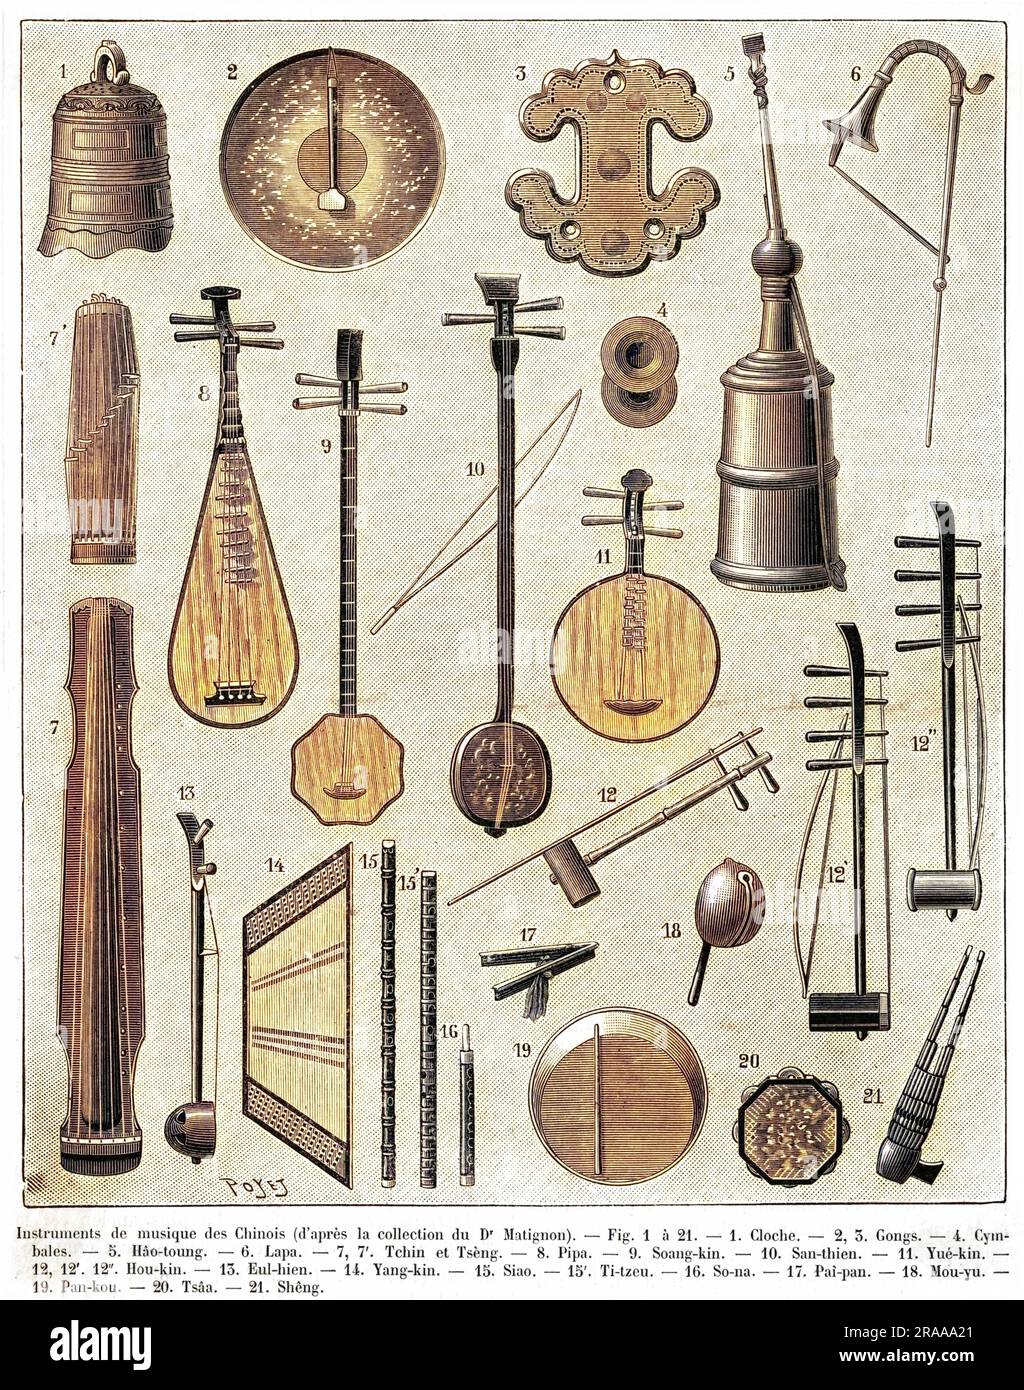 A selection of Chinese musical instruments, including a bell(1),gong,(2), cymbals(4),a guqin or seven-stringed zither(7), a pipa or four-stringed lute (8), Yueqin or moon-shaped lute(11),shamisen(10), erhu or spike fiddle(13)Yang-Qin(also known as the yangkin or Chinese dulcimer)(14),Xiao(also known as siao or flute)(15)and sheng(21).     Date: 1895 Stock Photo